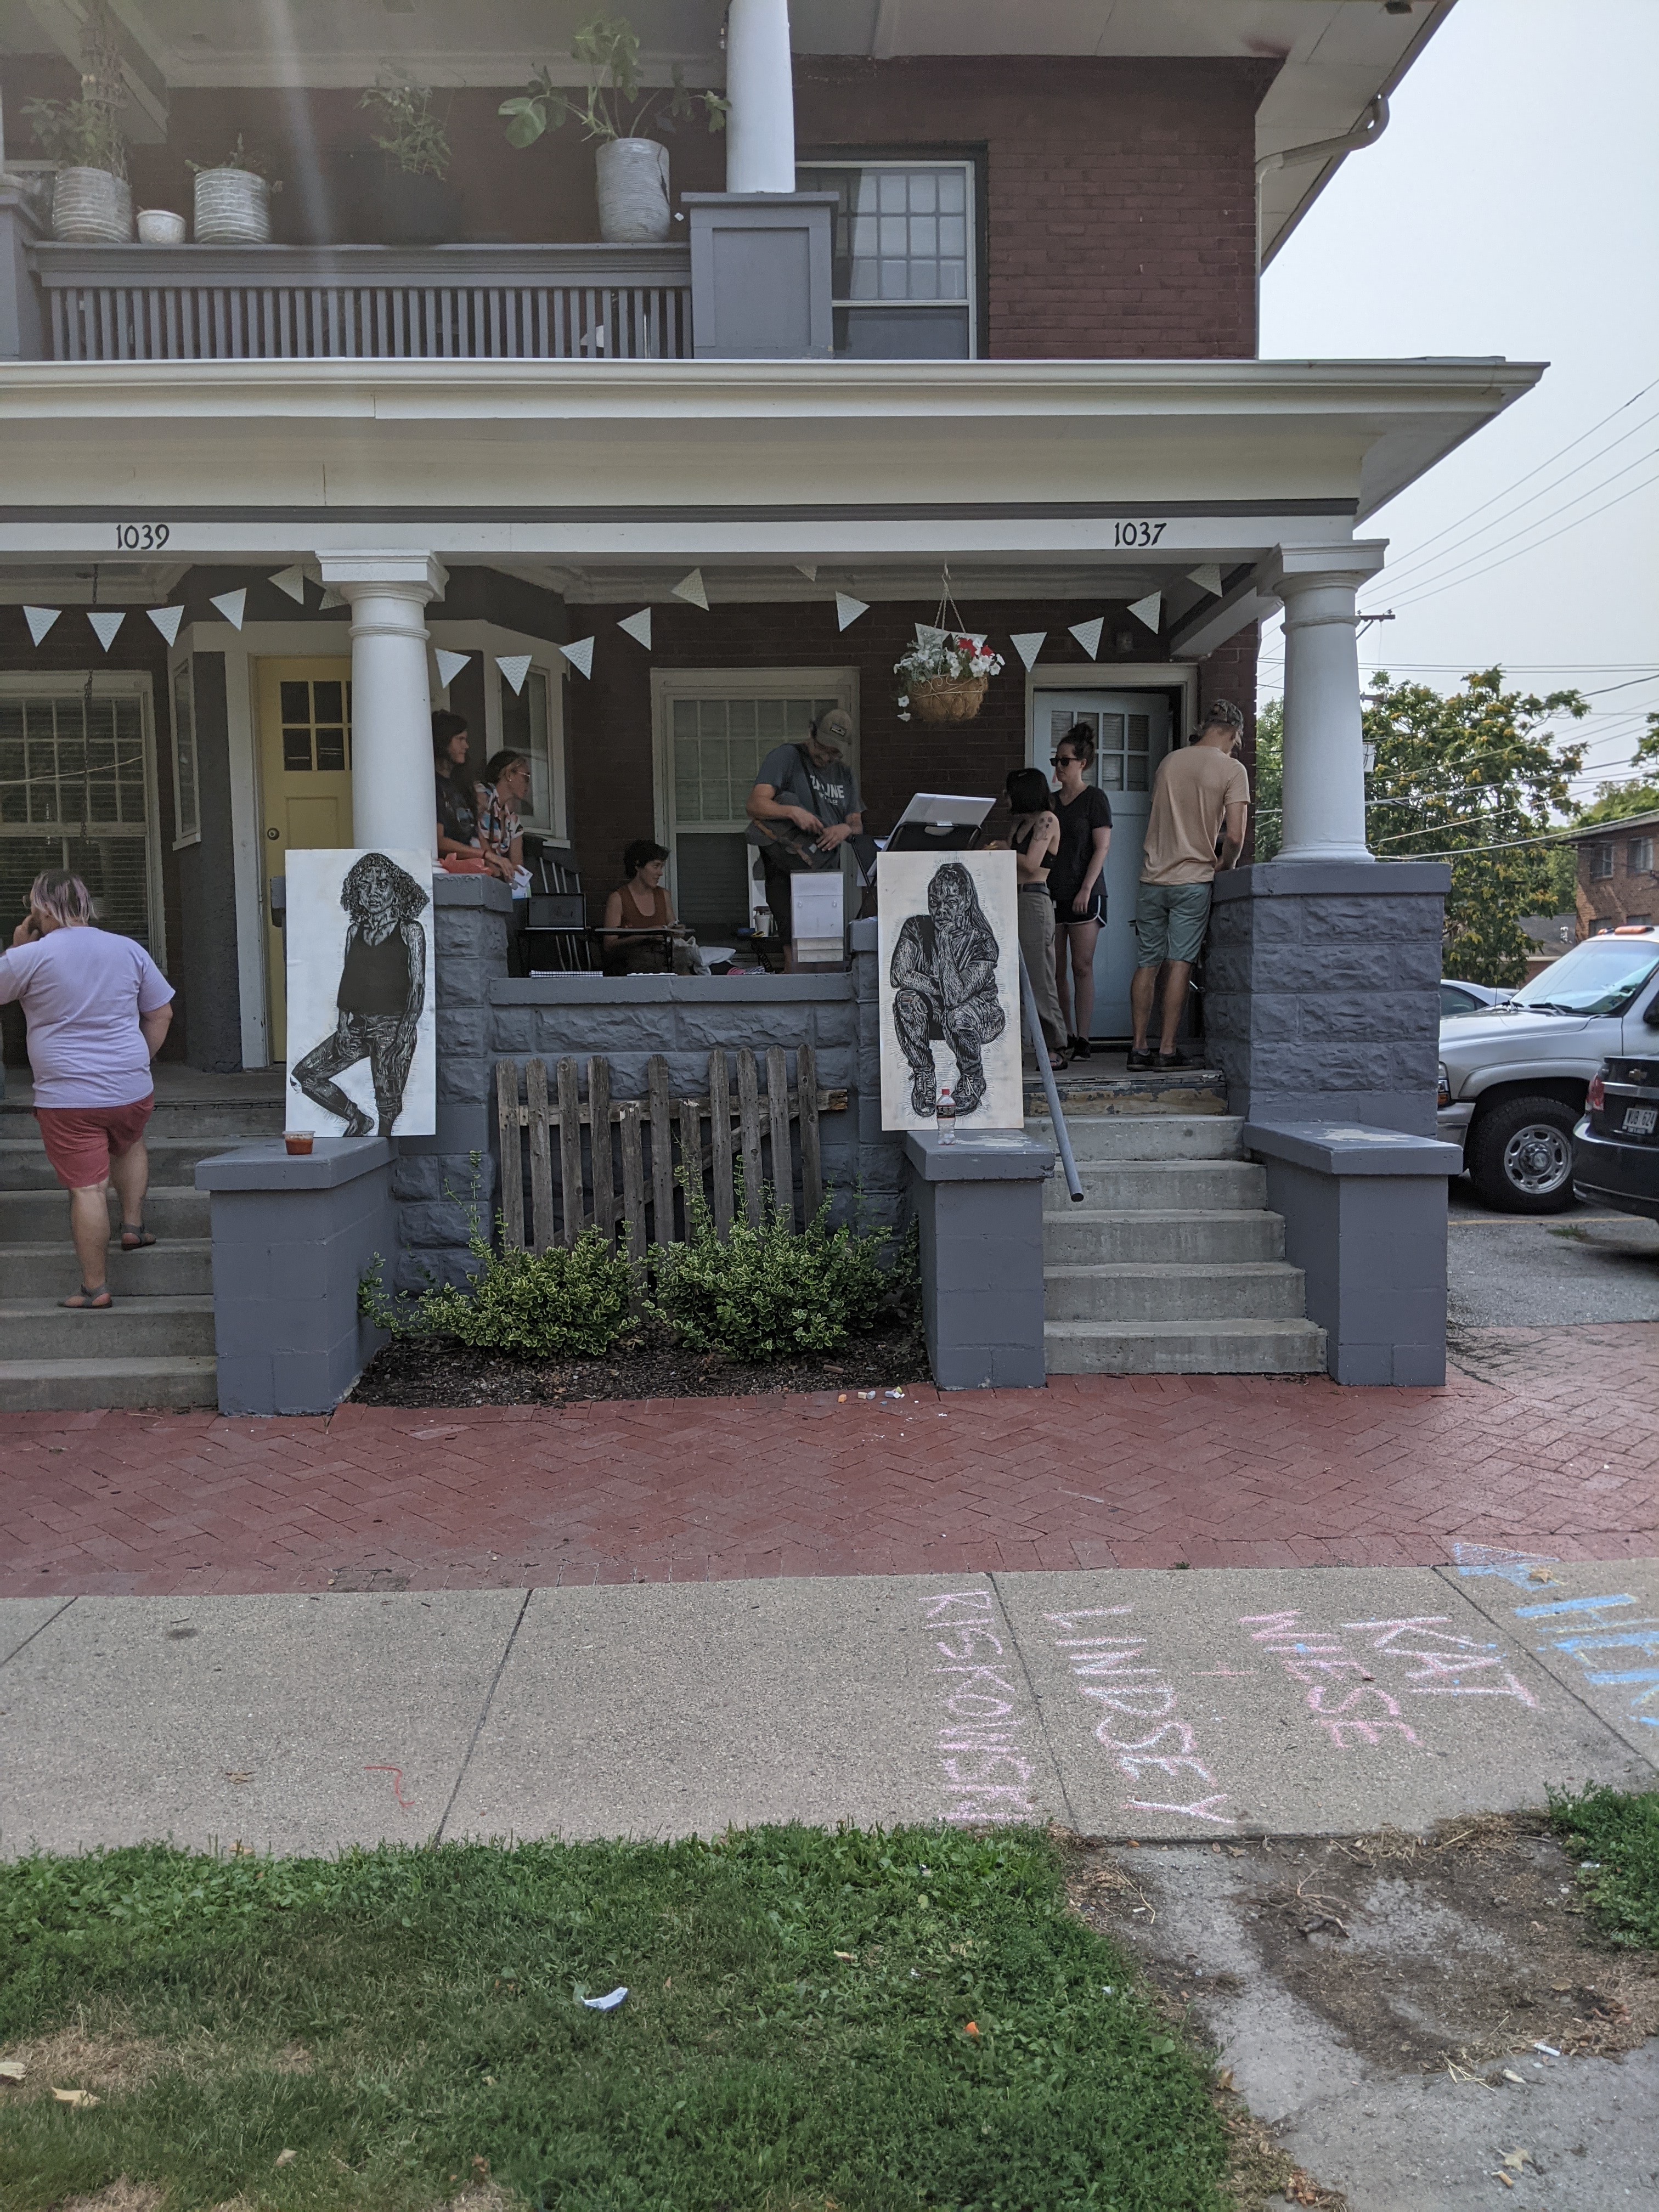 Two Canvases With Illustrations Sit On Two Neighboring Porches While People Gather On The Right Porch